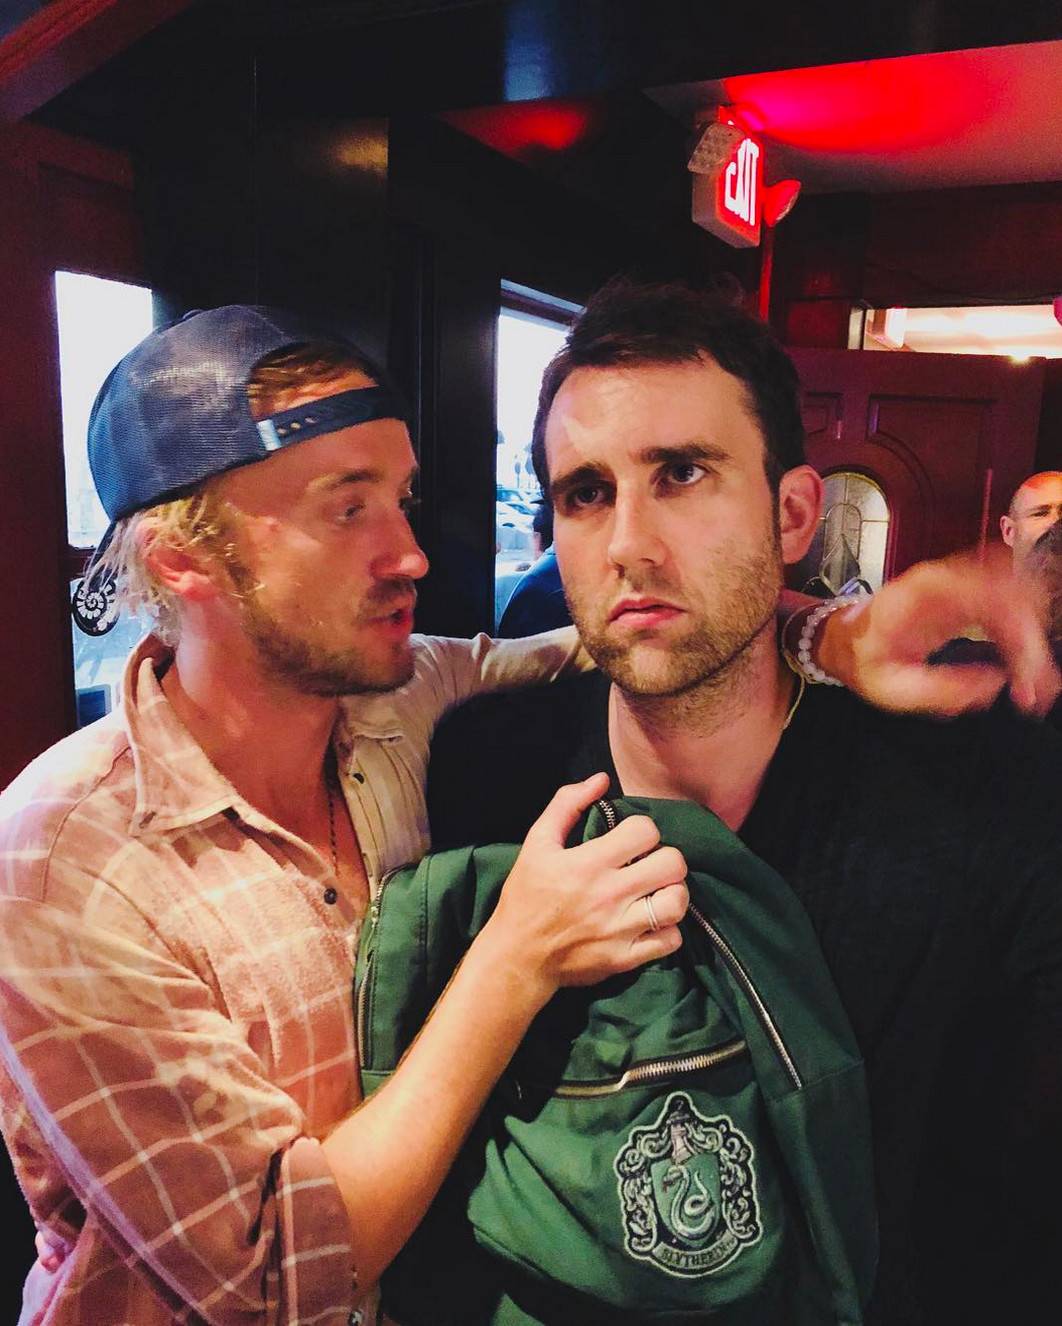 Matthew Lewis and Tom Felton Have Mini Harry Potter Reunion—But Neville Longbottom Is Gryffindor Forever